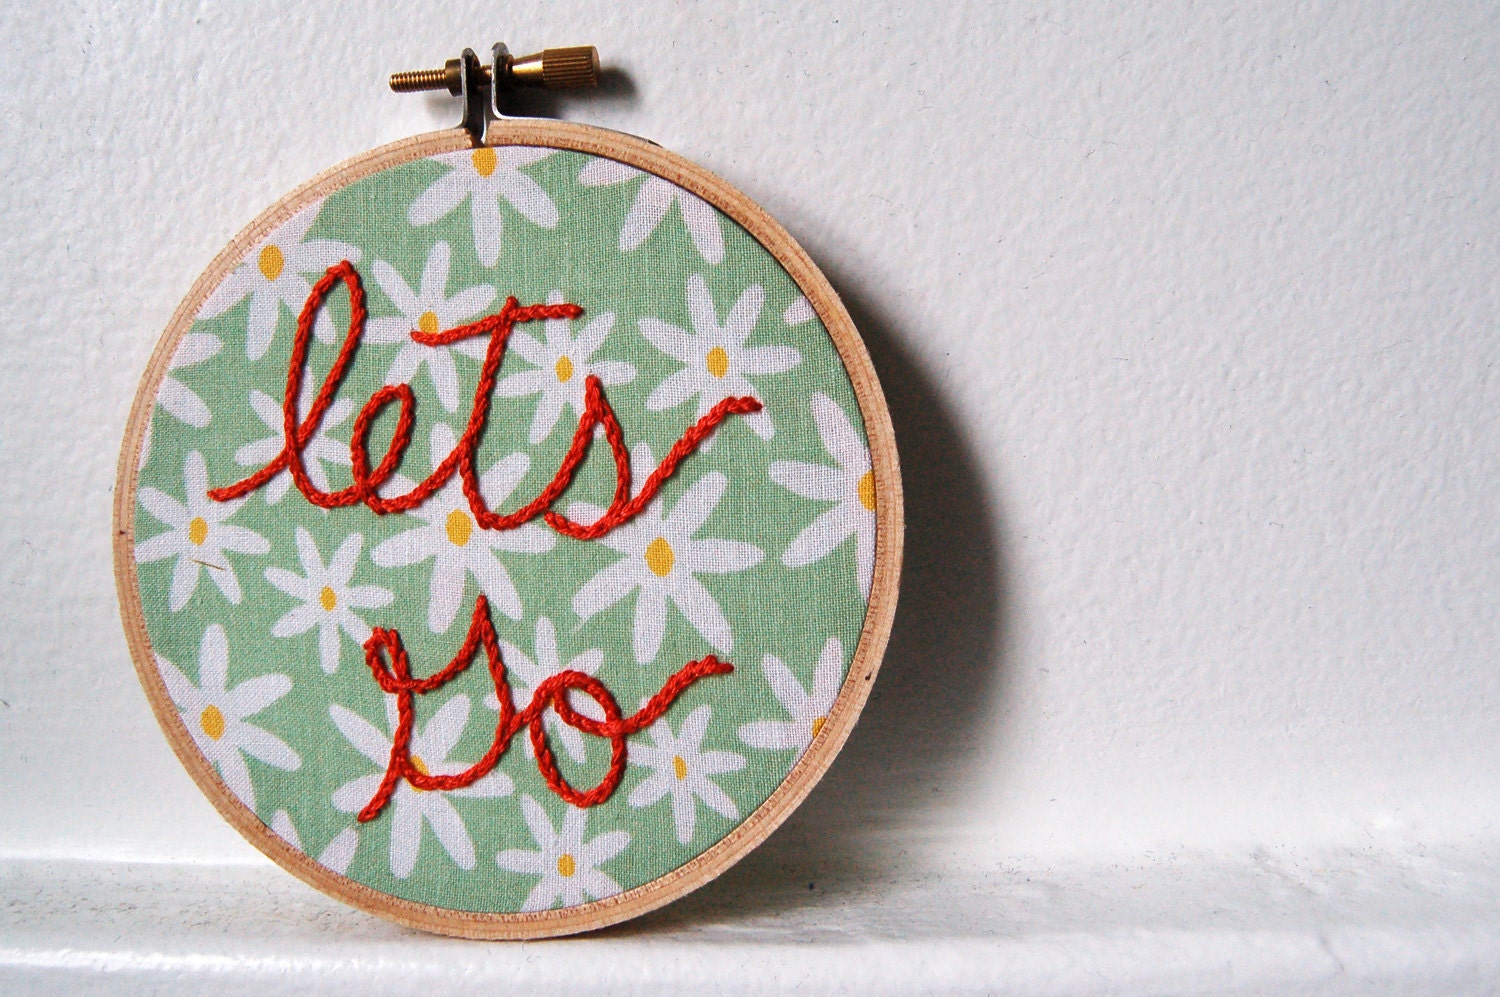 Lets Go. Daisies with Green and Orange, Hand Embroidery in 4 inch Hoop. By merriweathercouncil on Etsy